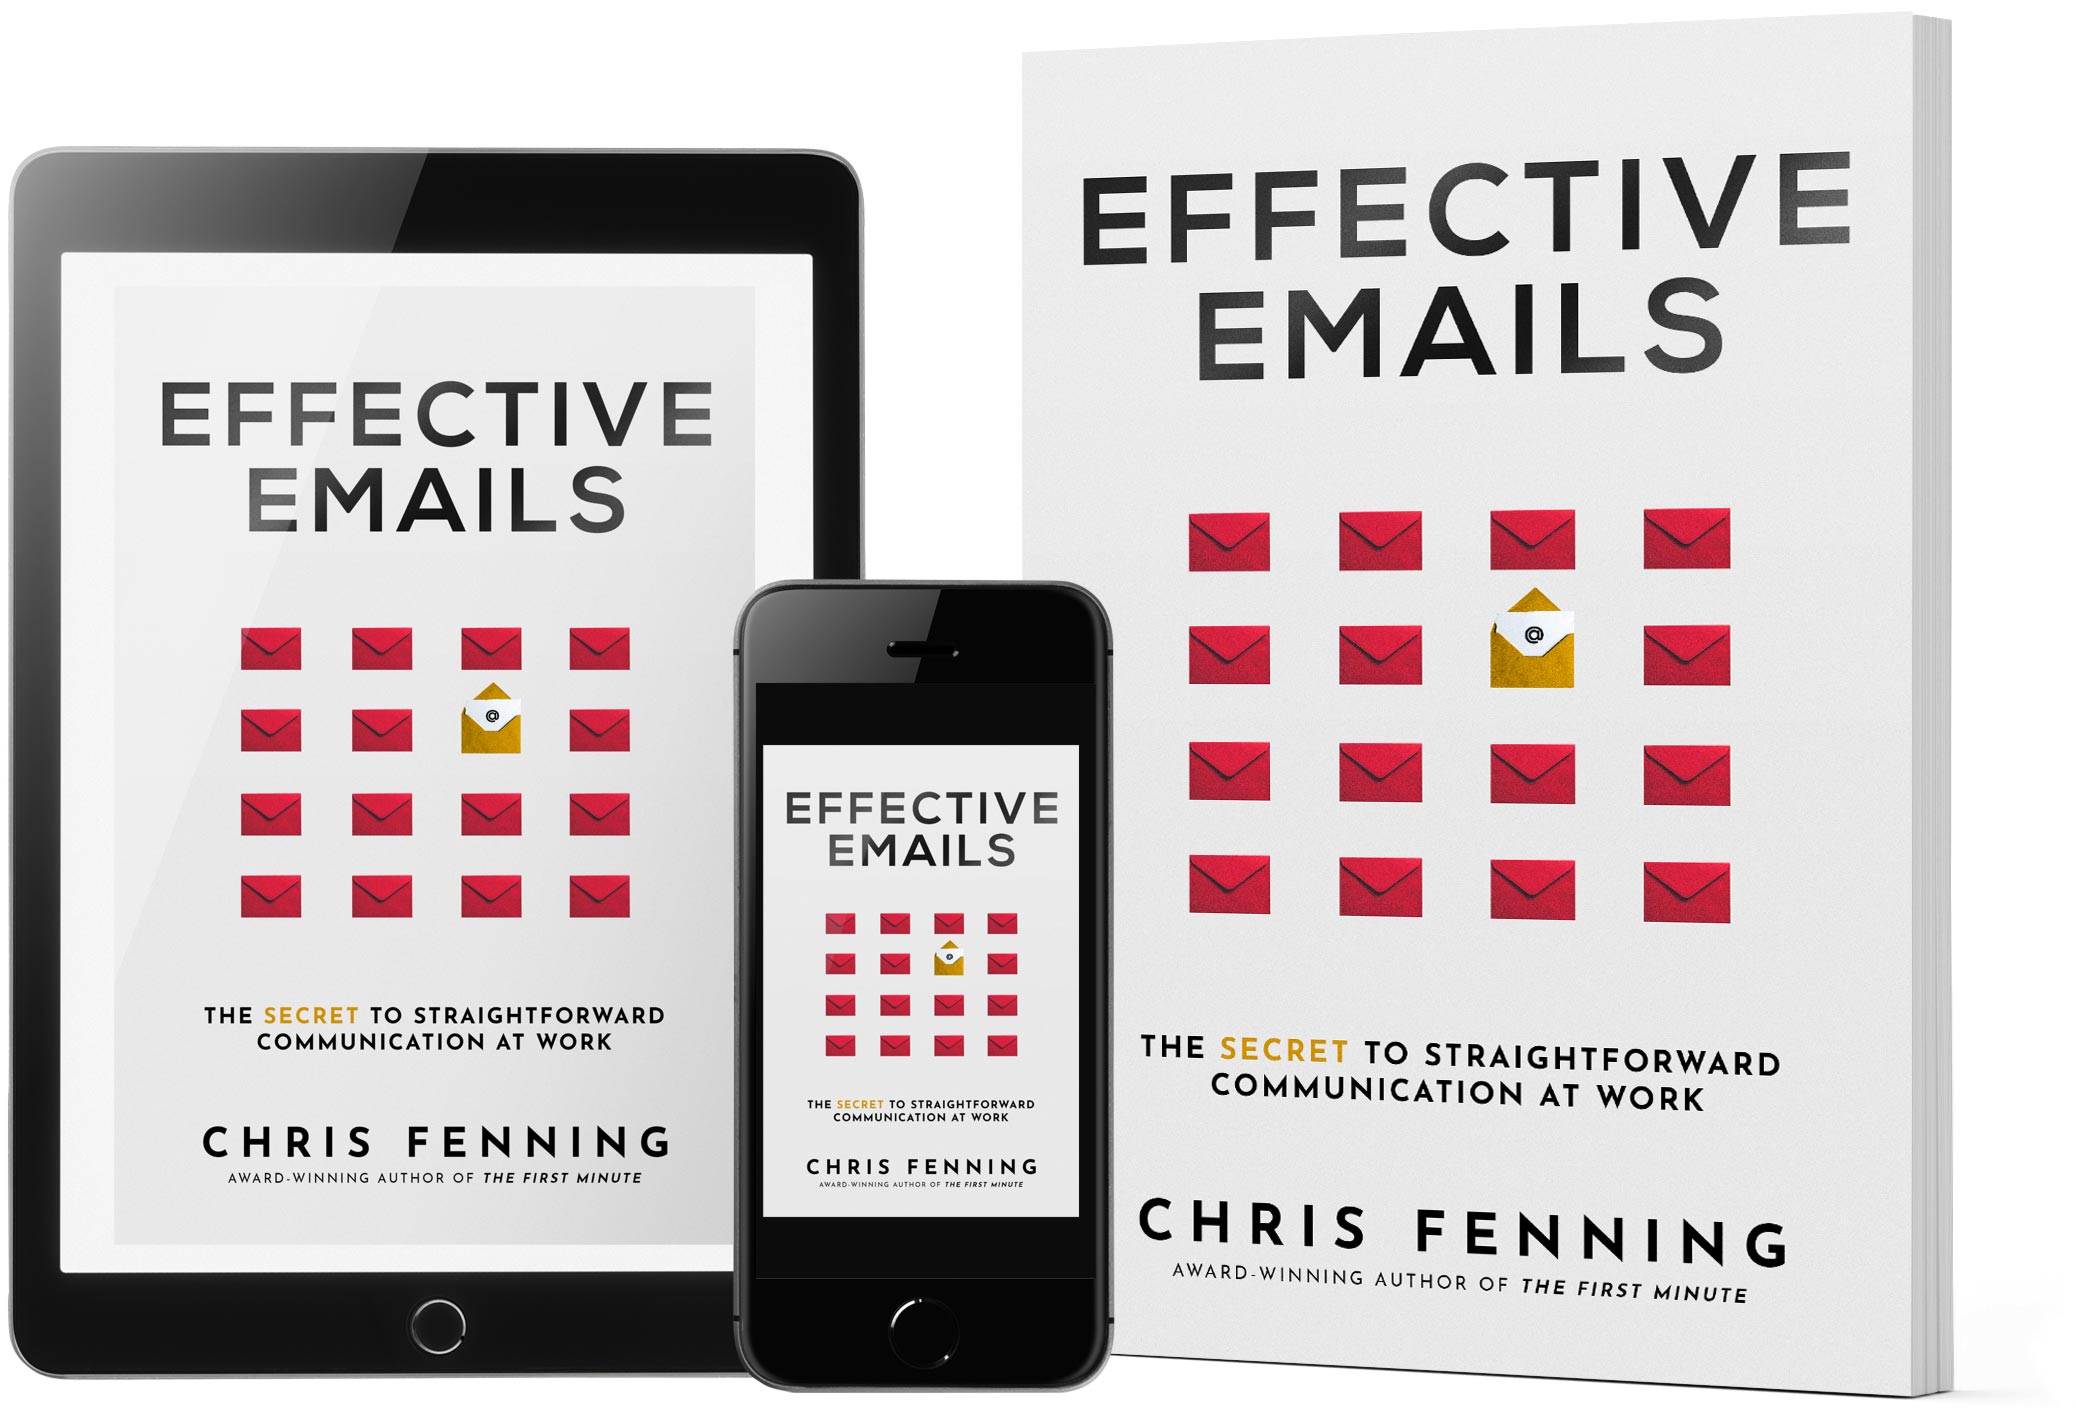 Effective Emails book by Chris Fenning